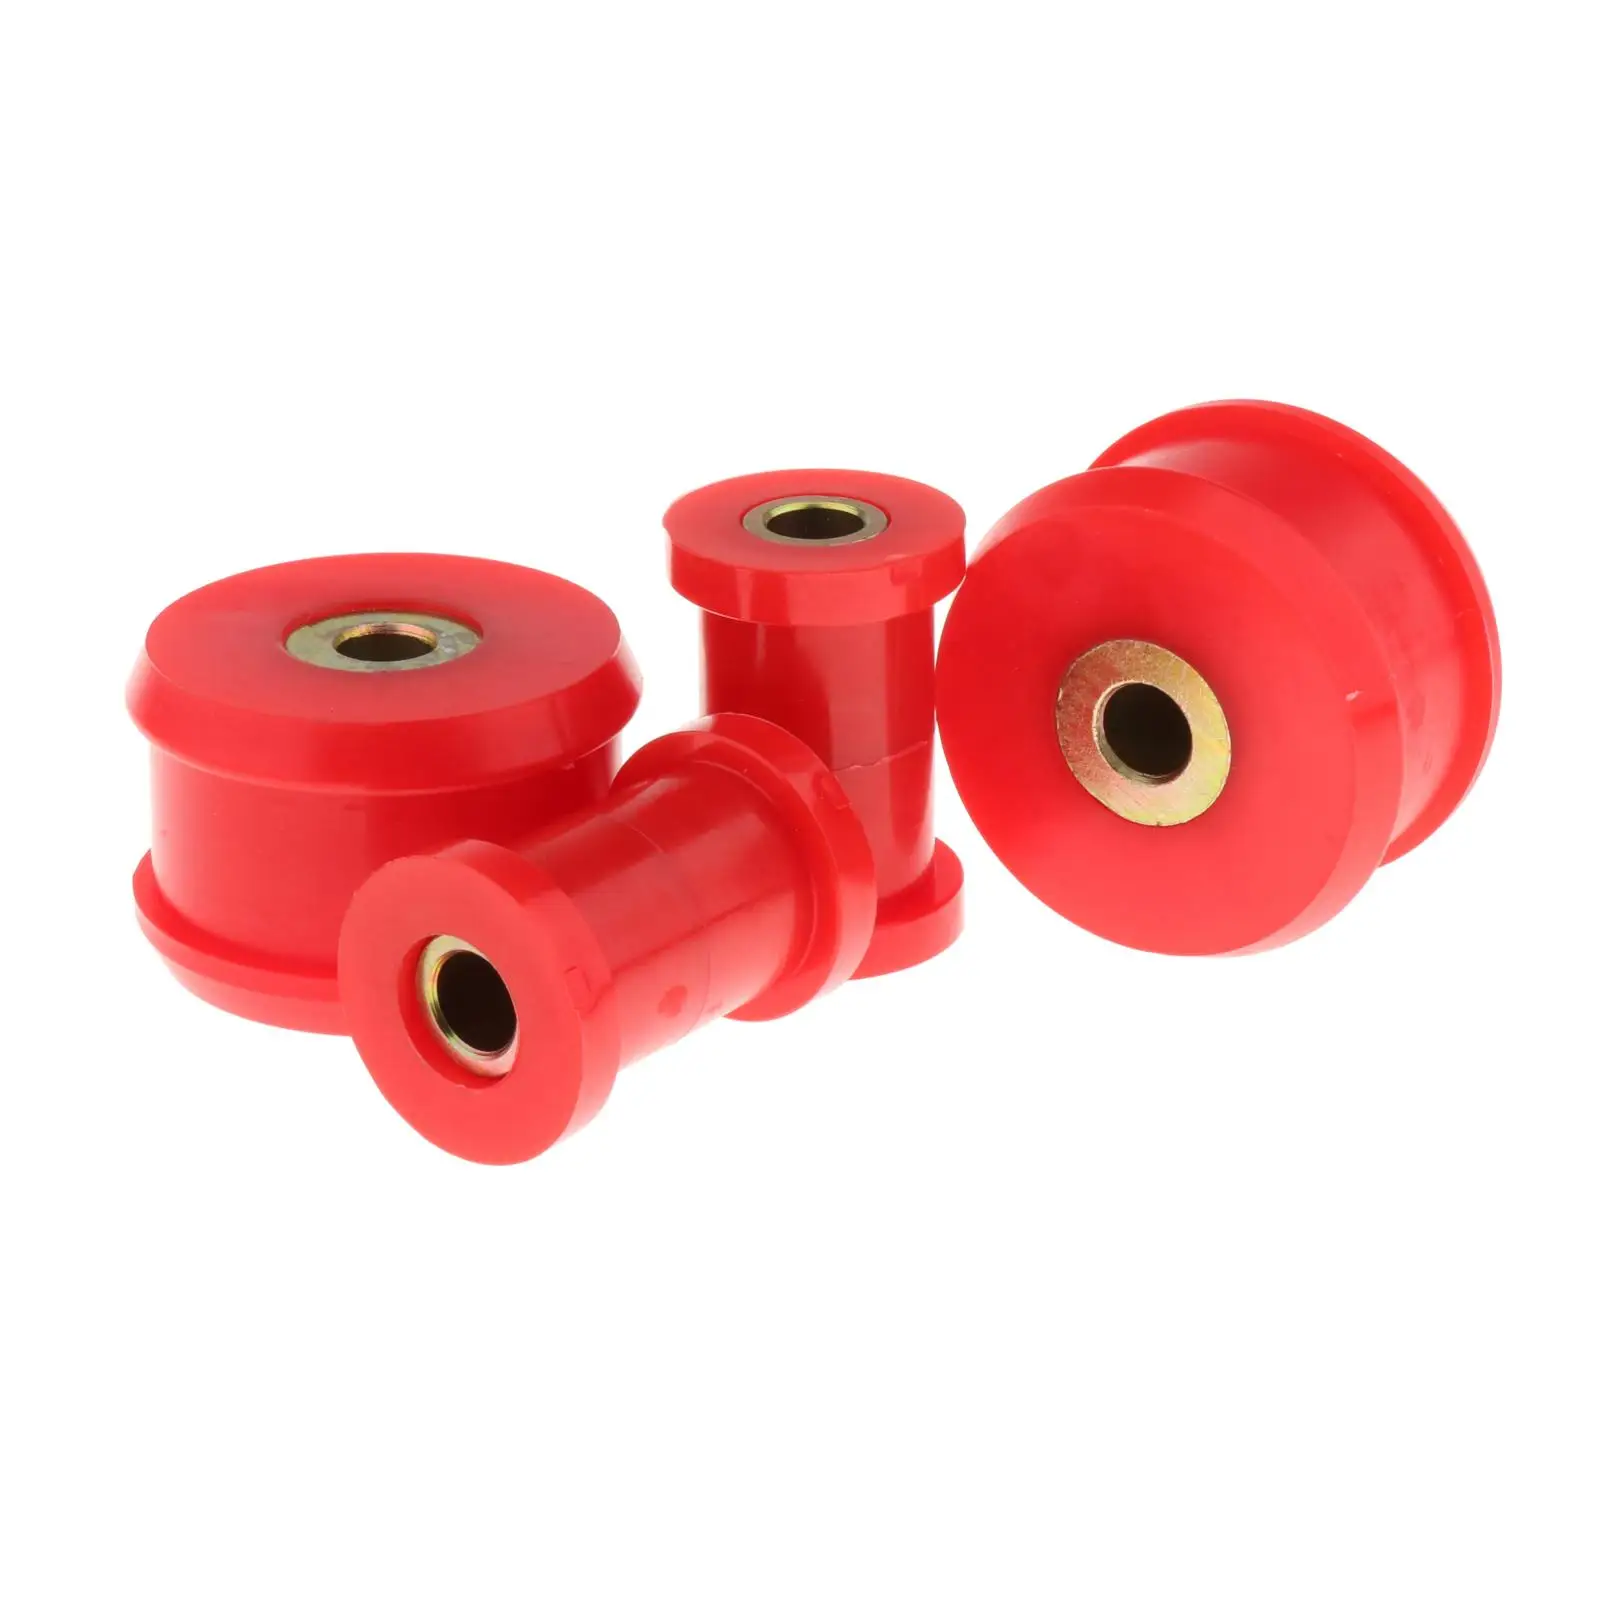 Automotive Front Control Arm Bushings Red for VW Jetta MK2 MK3 MK4 1985-2006